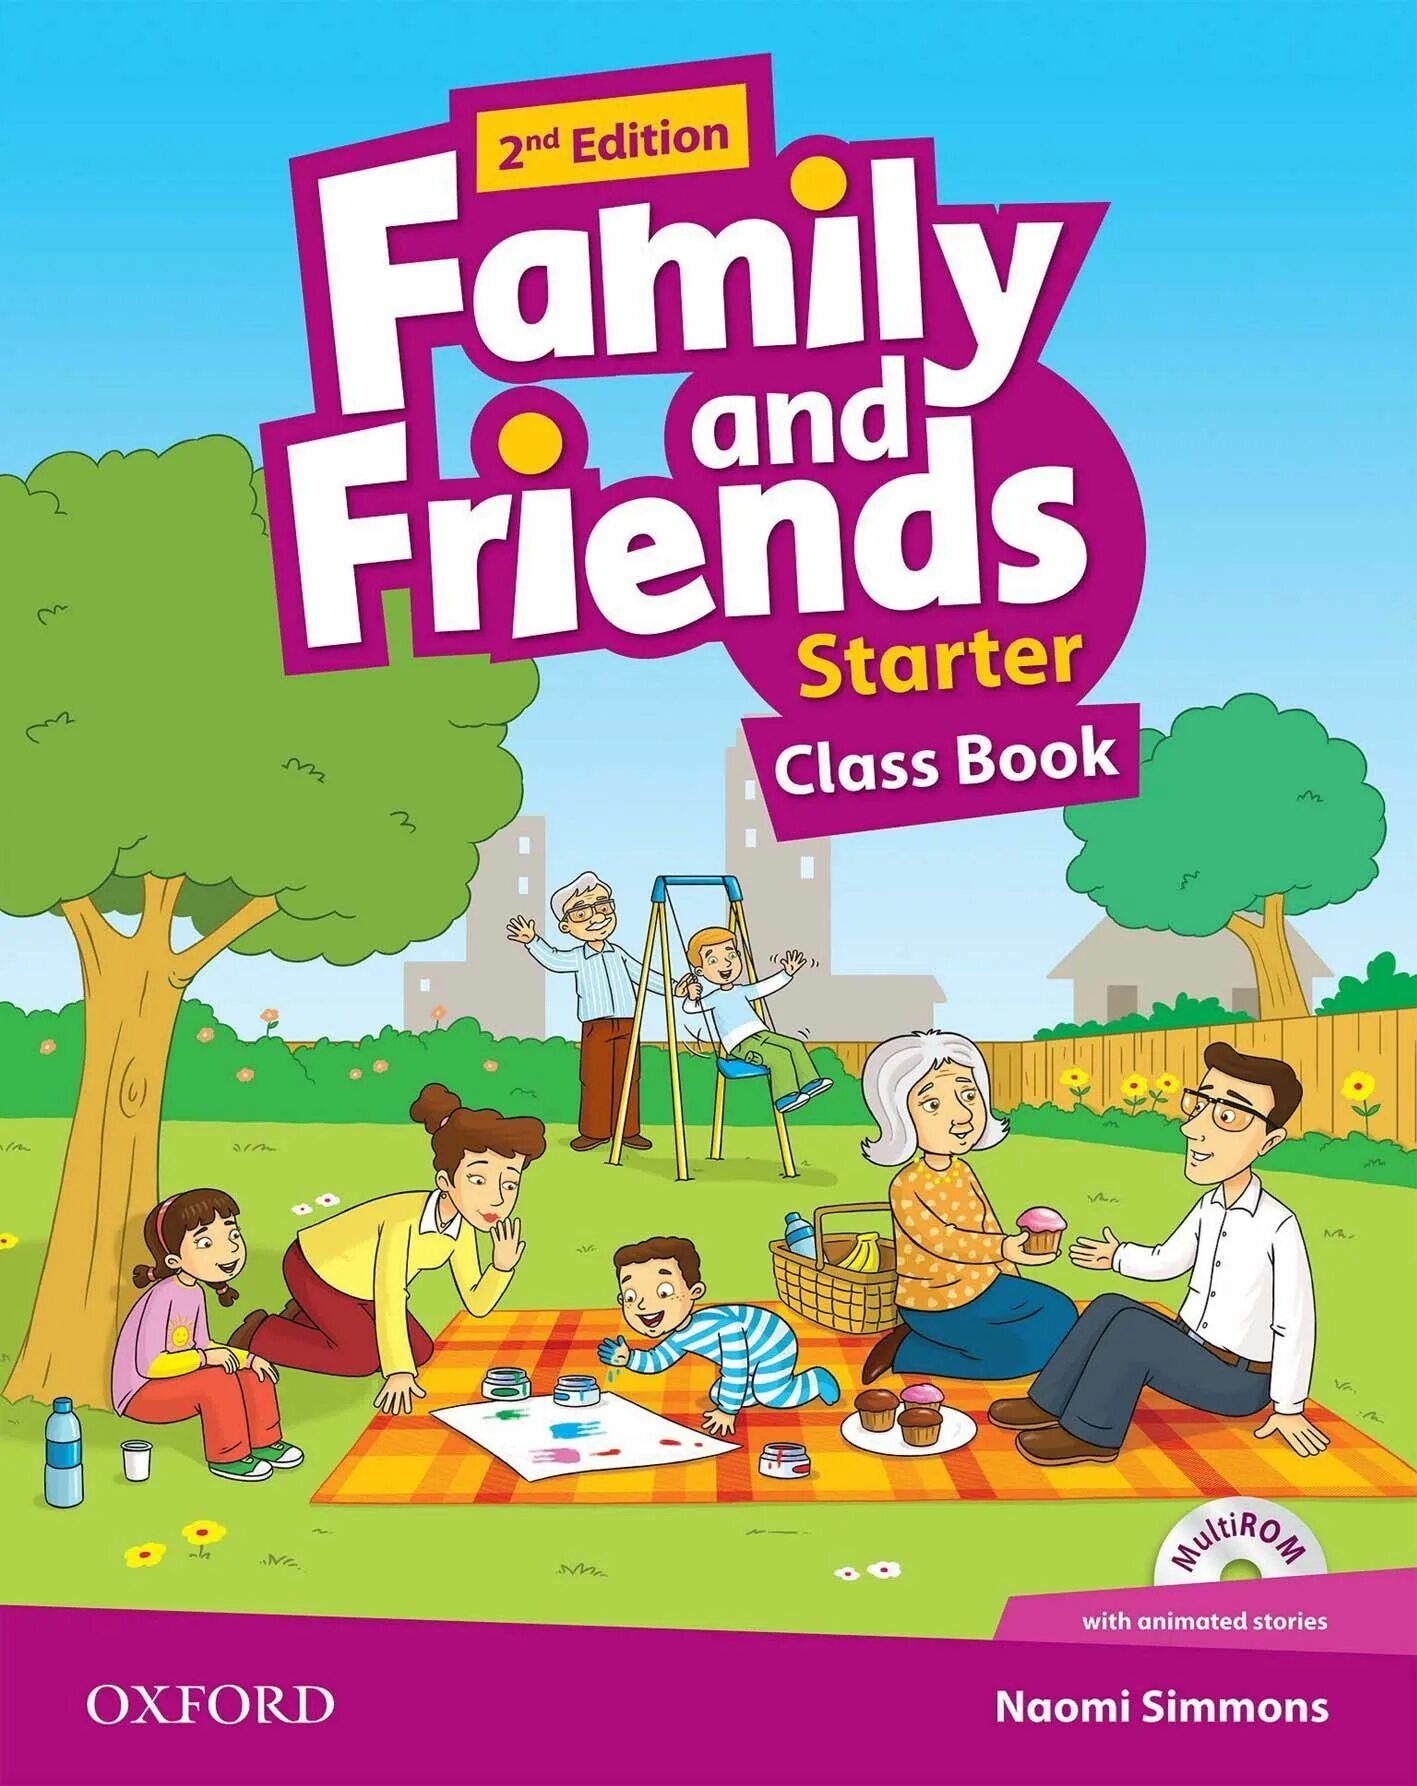 My class book. Family and friends 2 Edition Classbook. Family and friends 2 class book Starter. Учебник Oxford Family and friends 2. 2nd Edition Family and friends Starter Workbook.